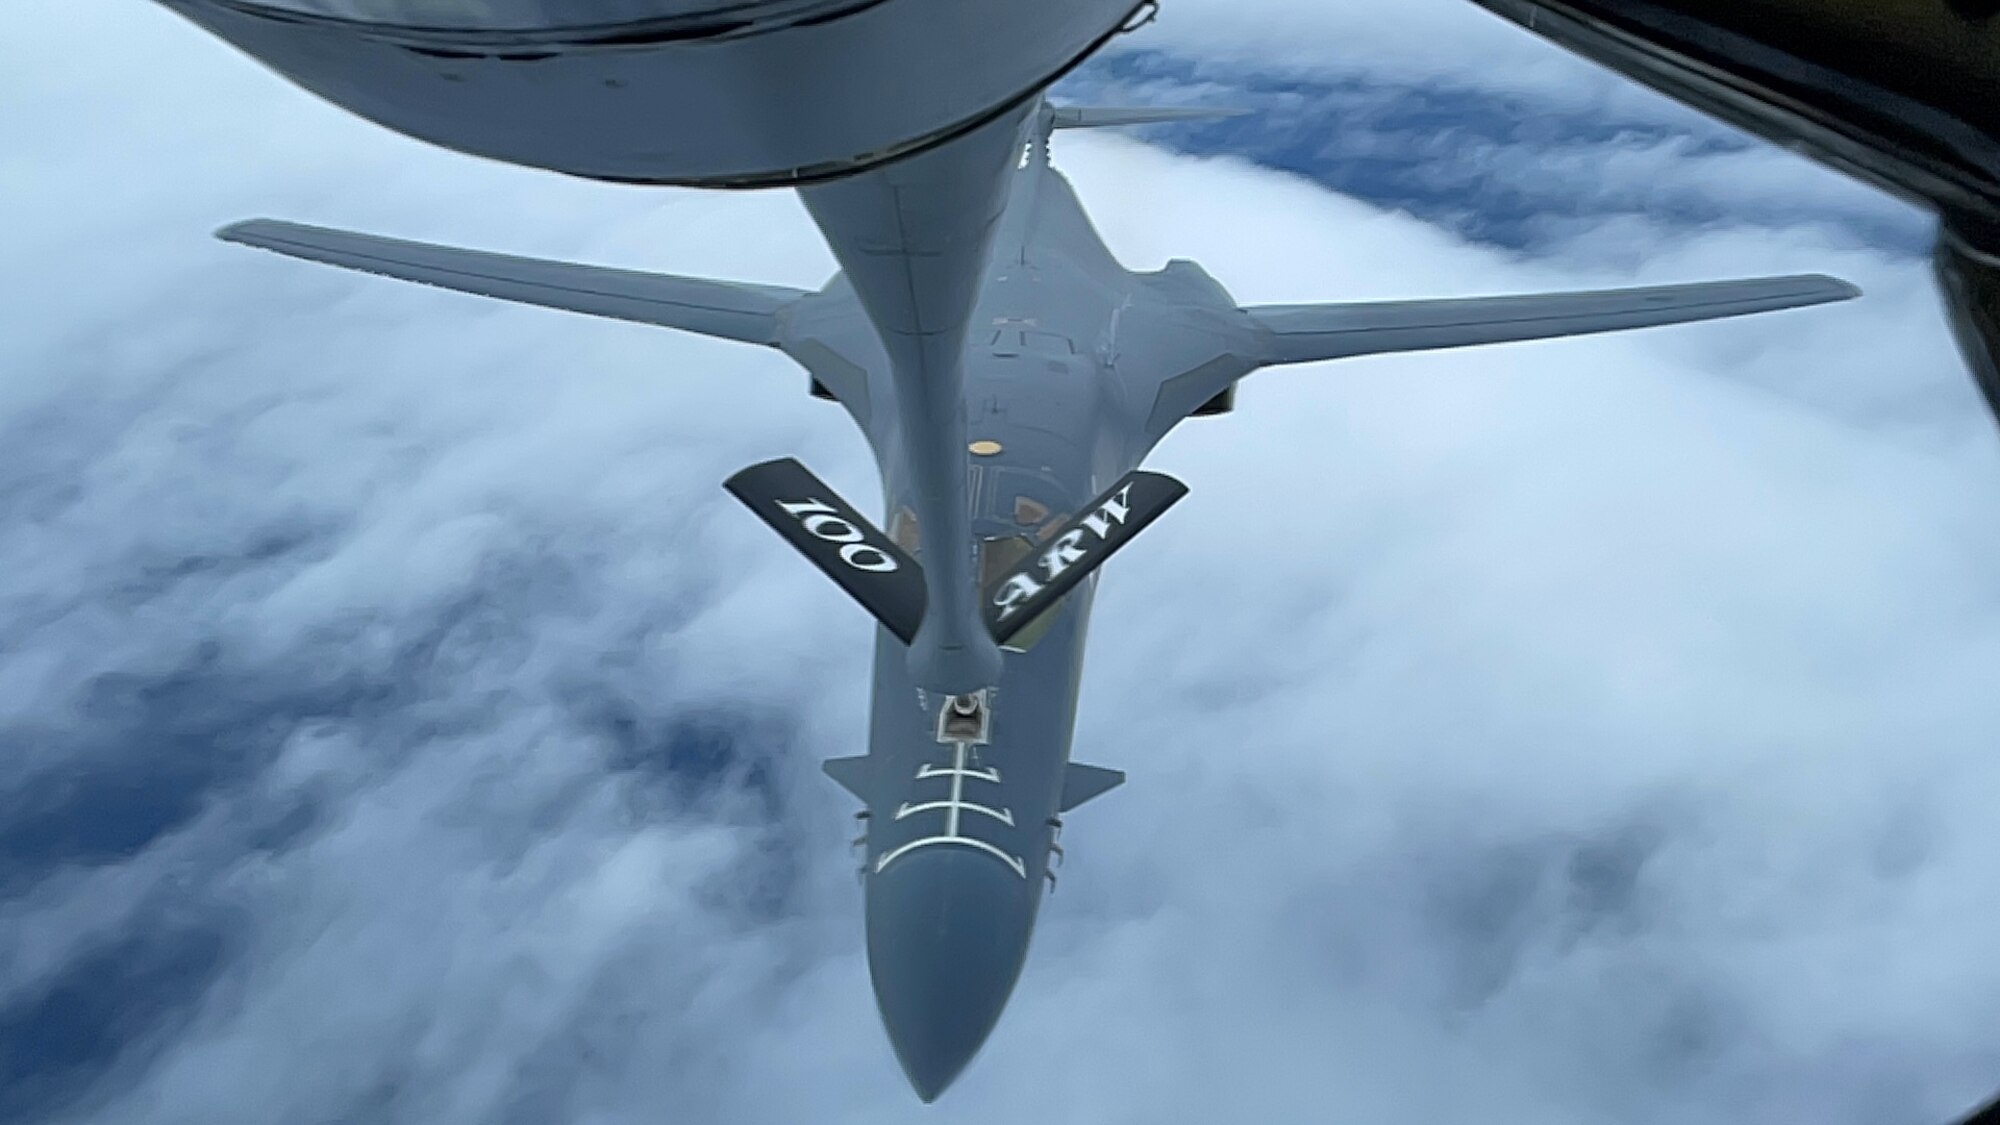 A U.S. Air Force B-1B Lancer aircraft assigned to the 9th Expeditionary Bomb Squadron receives fuel from a KC-135 Stratotanker aircraft assigned to the 100th Air Refueling Wing, Royal Air Force Mildenhall, England, during exercise Castle Forge off the coast of Norway, Nov. 1, 2021. The complexity of the European continent makes operating with allies and partners throughout Europe an imperative. Alongside F-15 operations in the Black Sea Region, Castle Forge encompasses the USAFE MAJCOM-wide Agile Combat Employment Initial Operating Capability capstone event. Both Castle Forge’s components will better enable forces to quickly disperse and continue to deliver air power from locations with varying levels of capacity and support, ensuring Airmen are always ready to respond to potential threats. (U.S. Air Force photo by Senior Airman Joseph Barron)